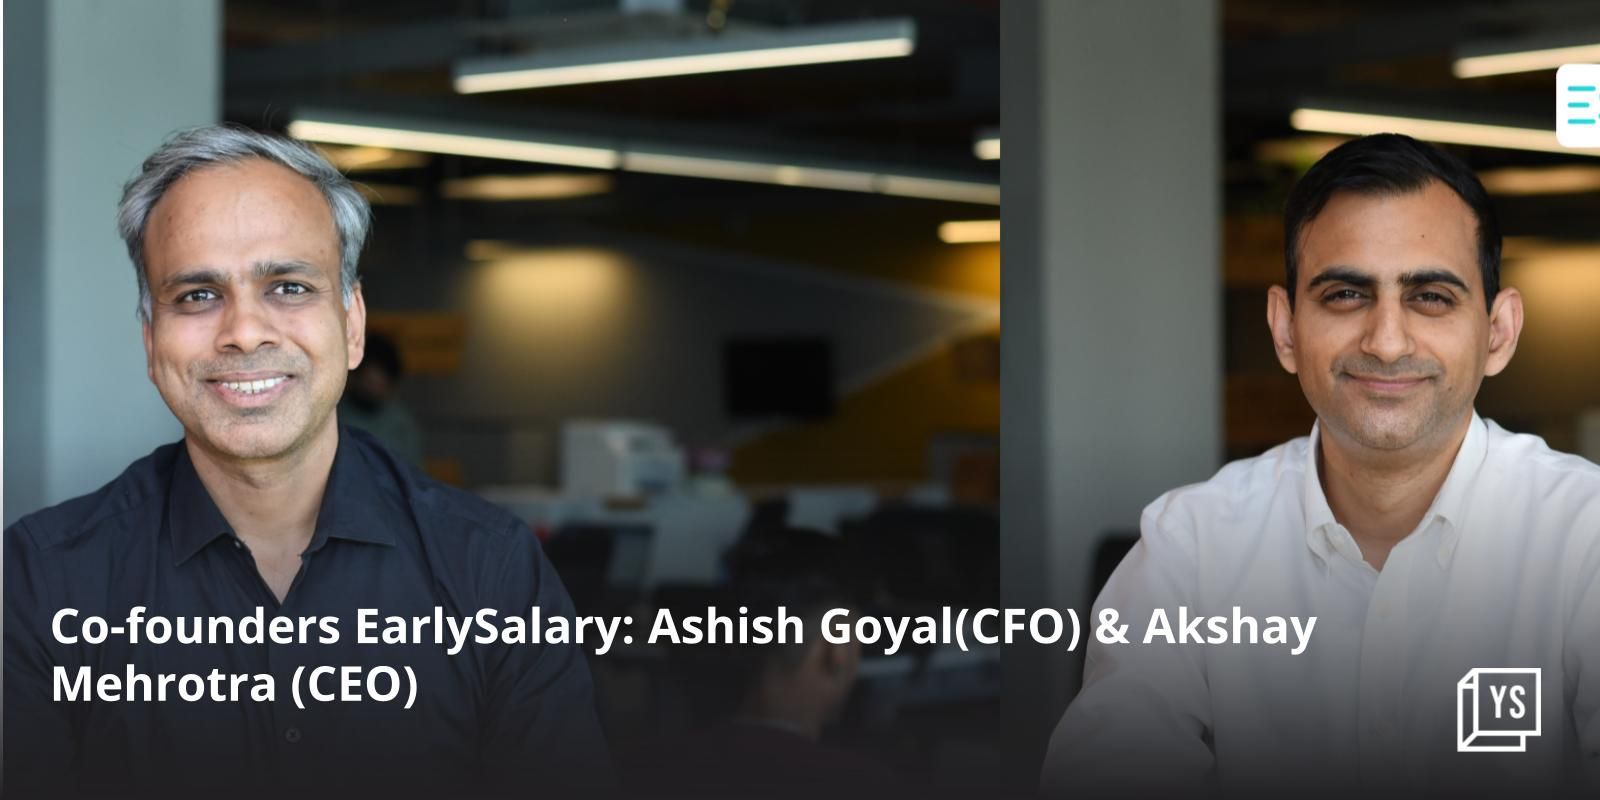 Fintech startup EarlySalary raises $110 M in Series D round led by TPG’s The Rise Fund